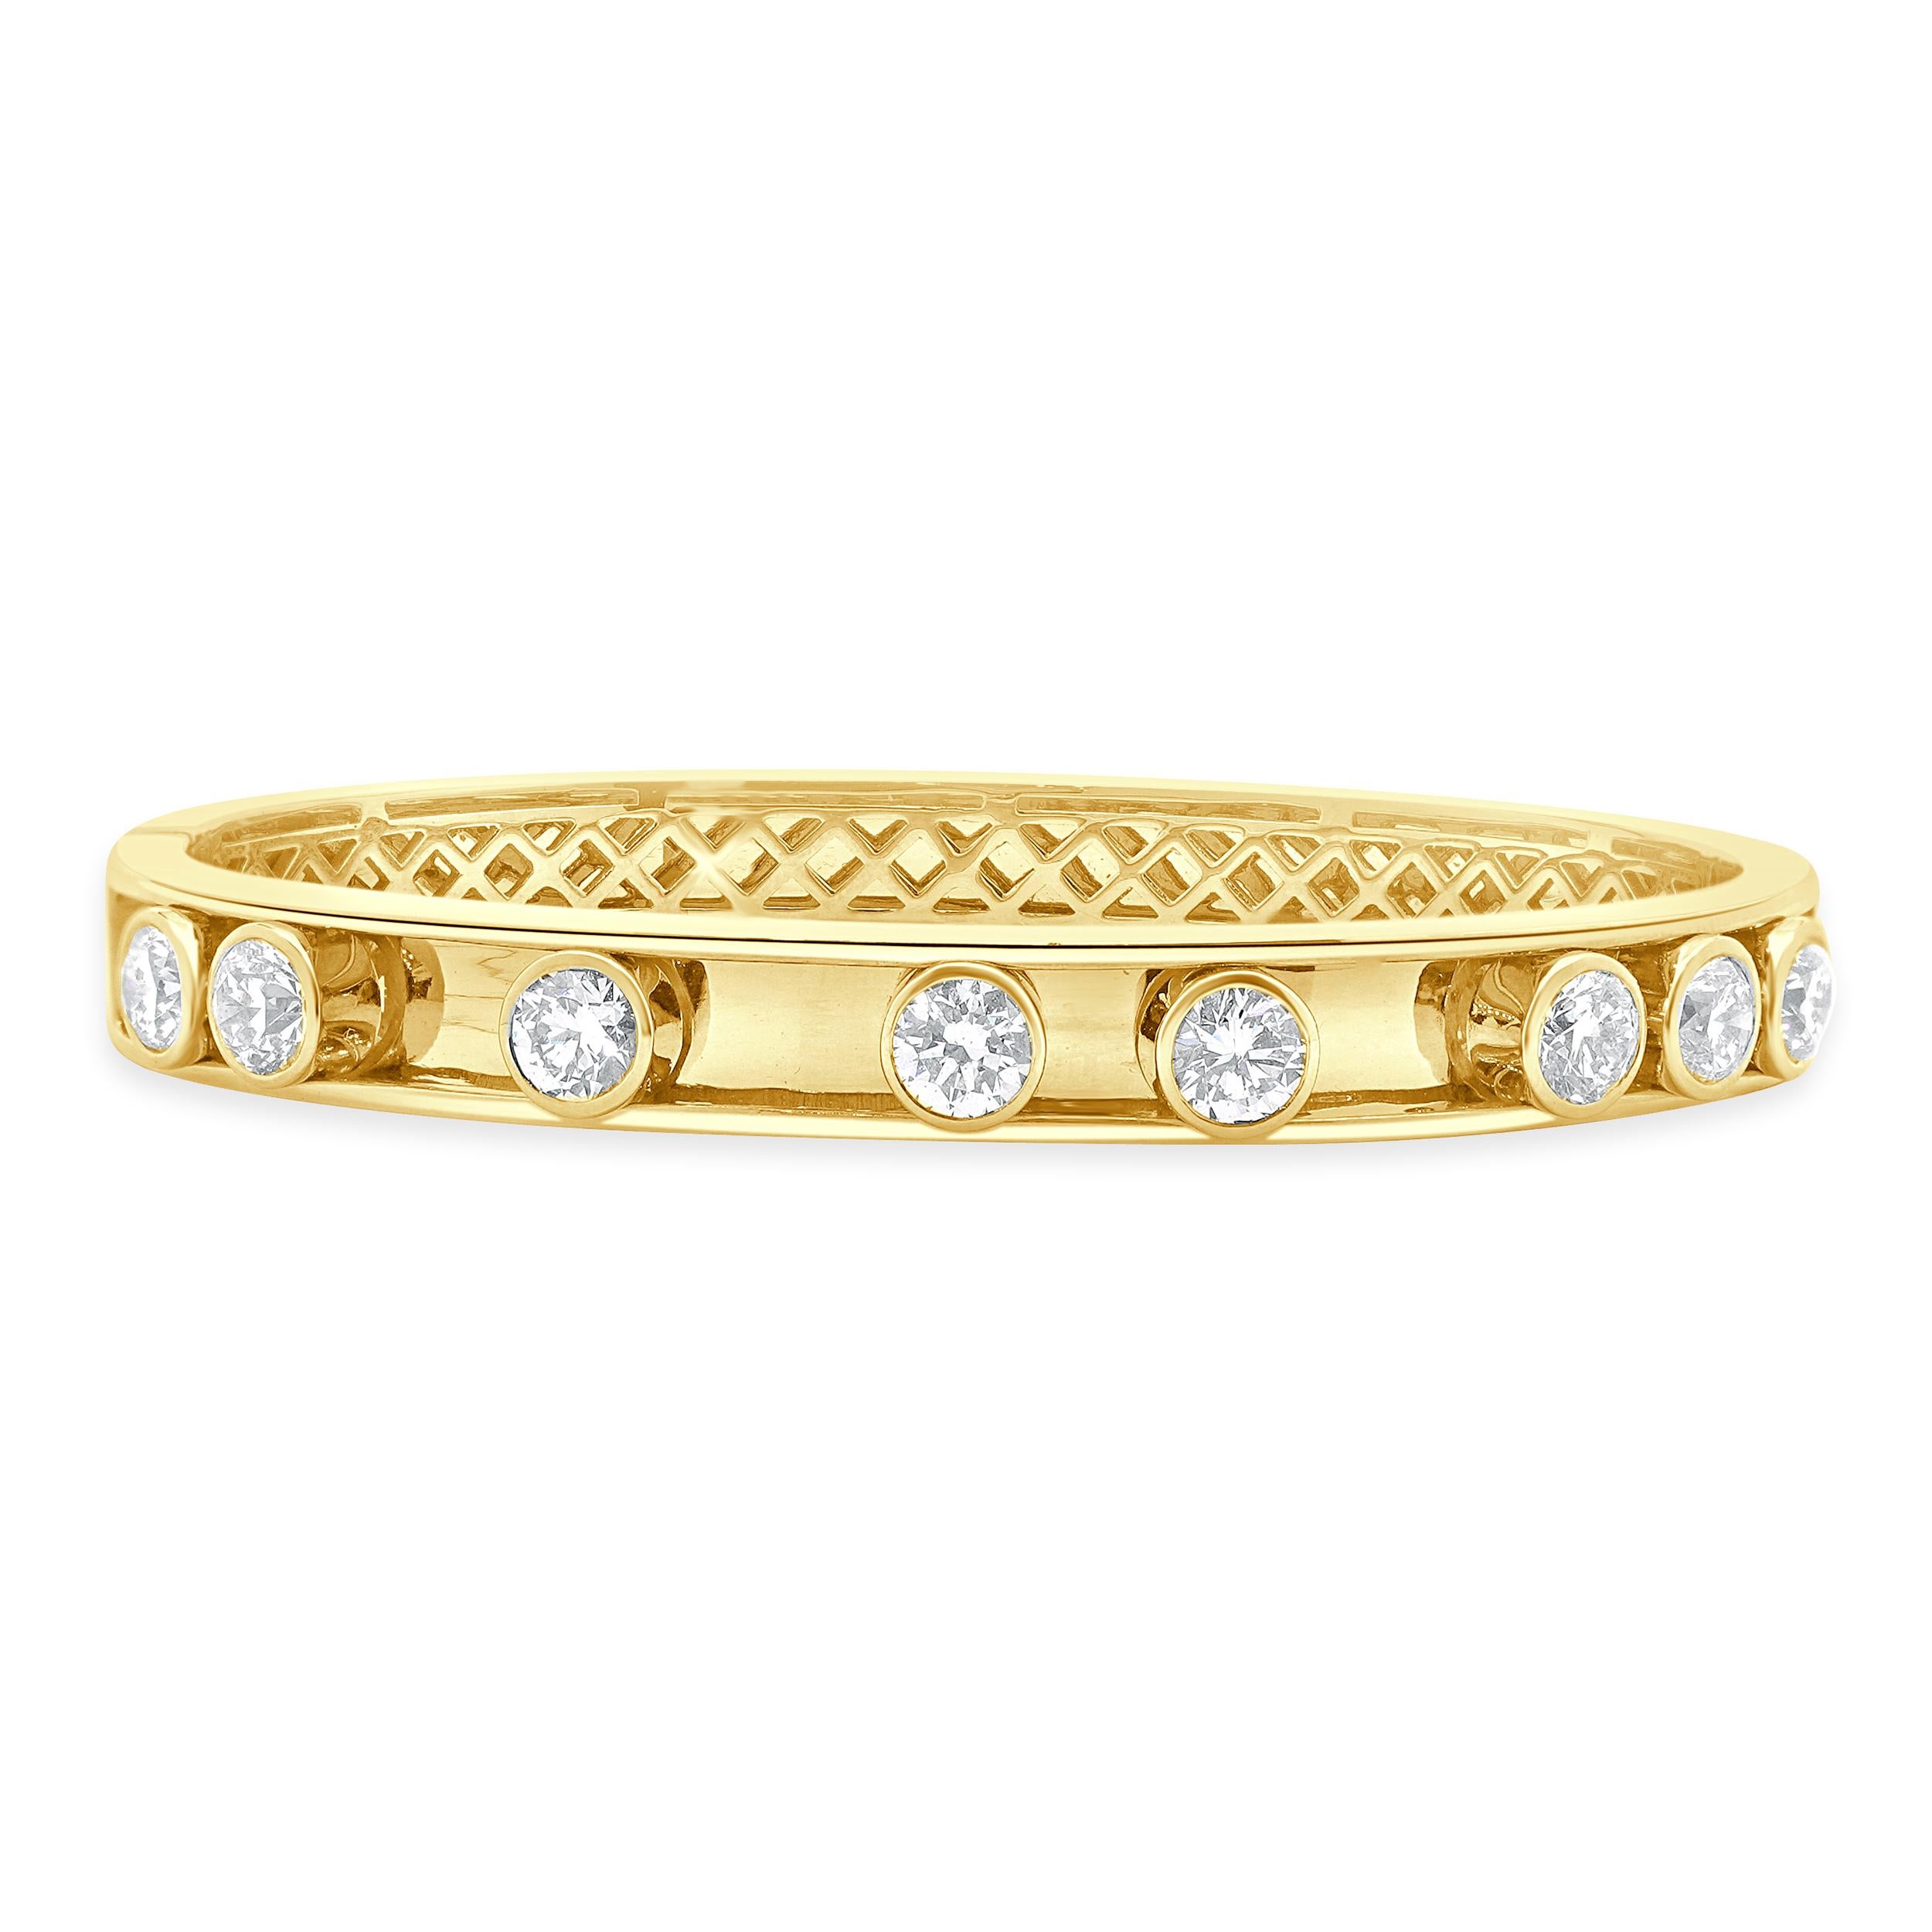 Designer: custom design
Material: 18K yellow gold
Diamond: 8 round brilliant = 4.25cttw
Color: H
Clarity: SI1-2
Dimensions: bracelet will fit up to a 6.5-inch wrist
Weight: 29.24 grams
